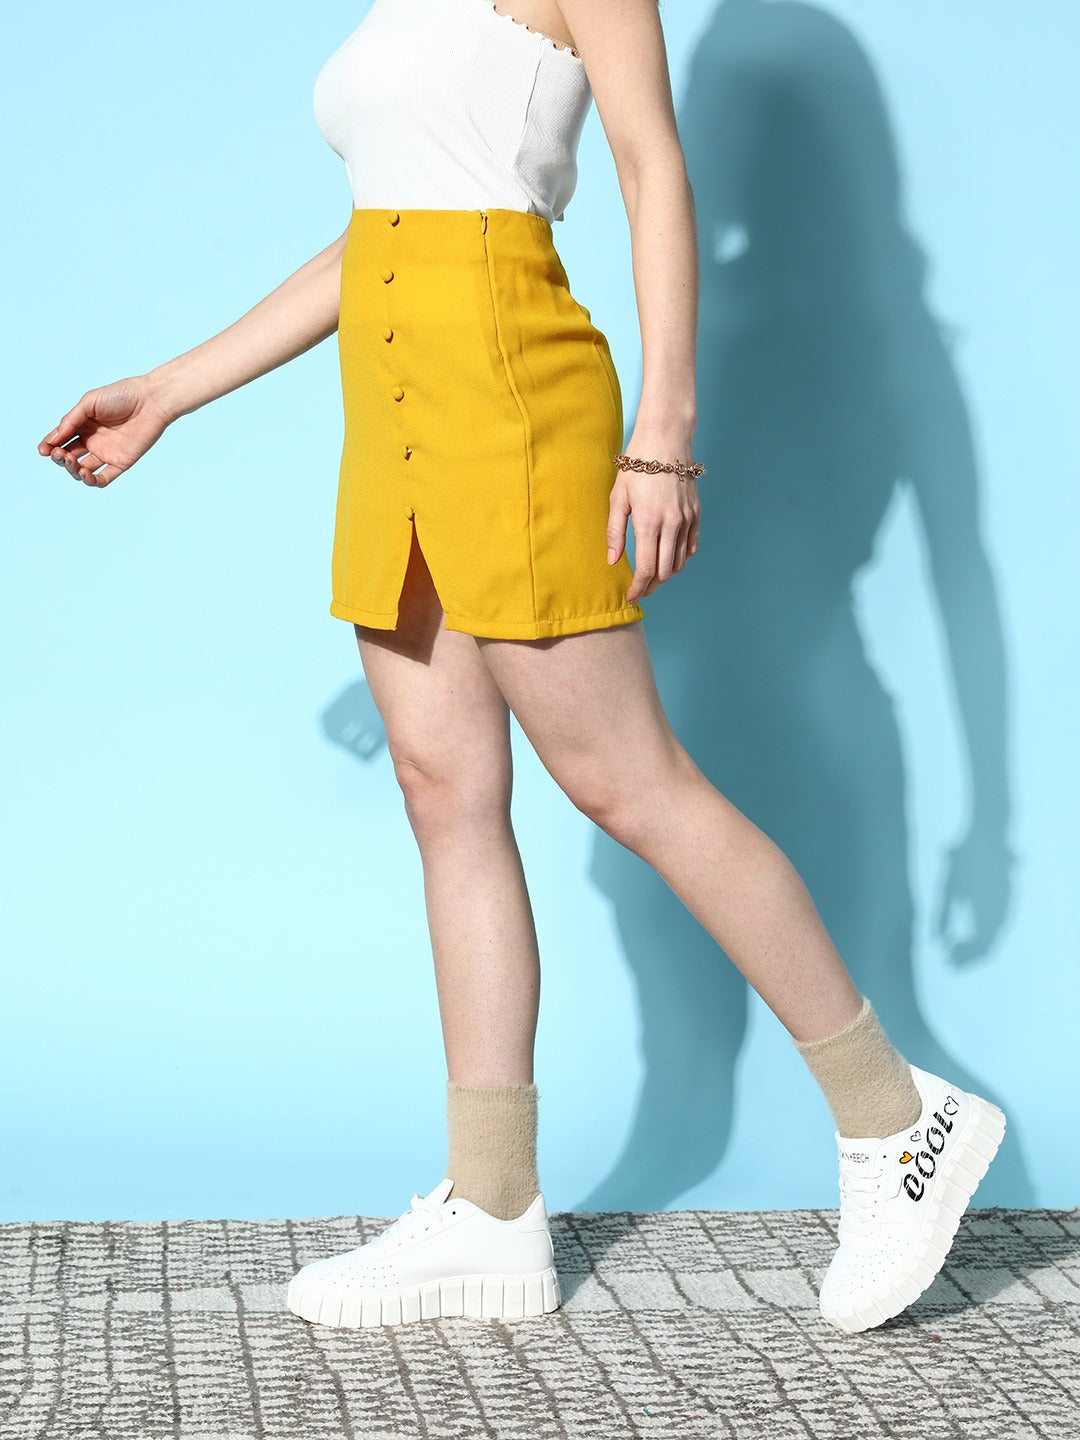 Yellow Skirt Outfits - 25 Fashionable Ways to Style